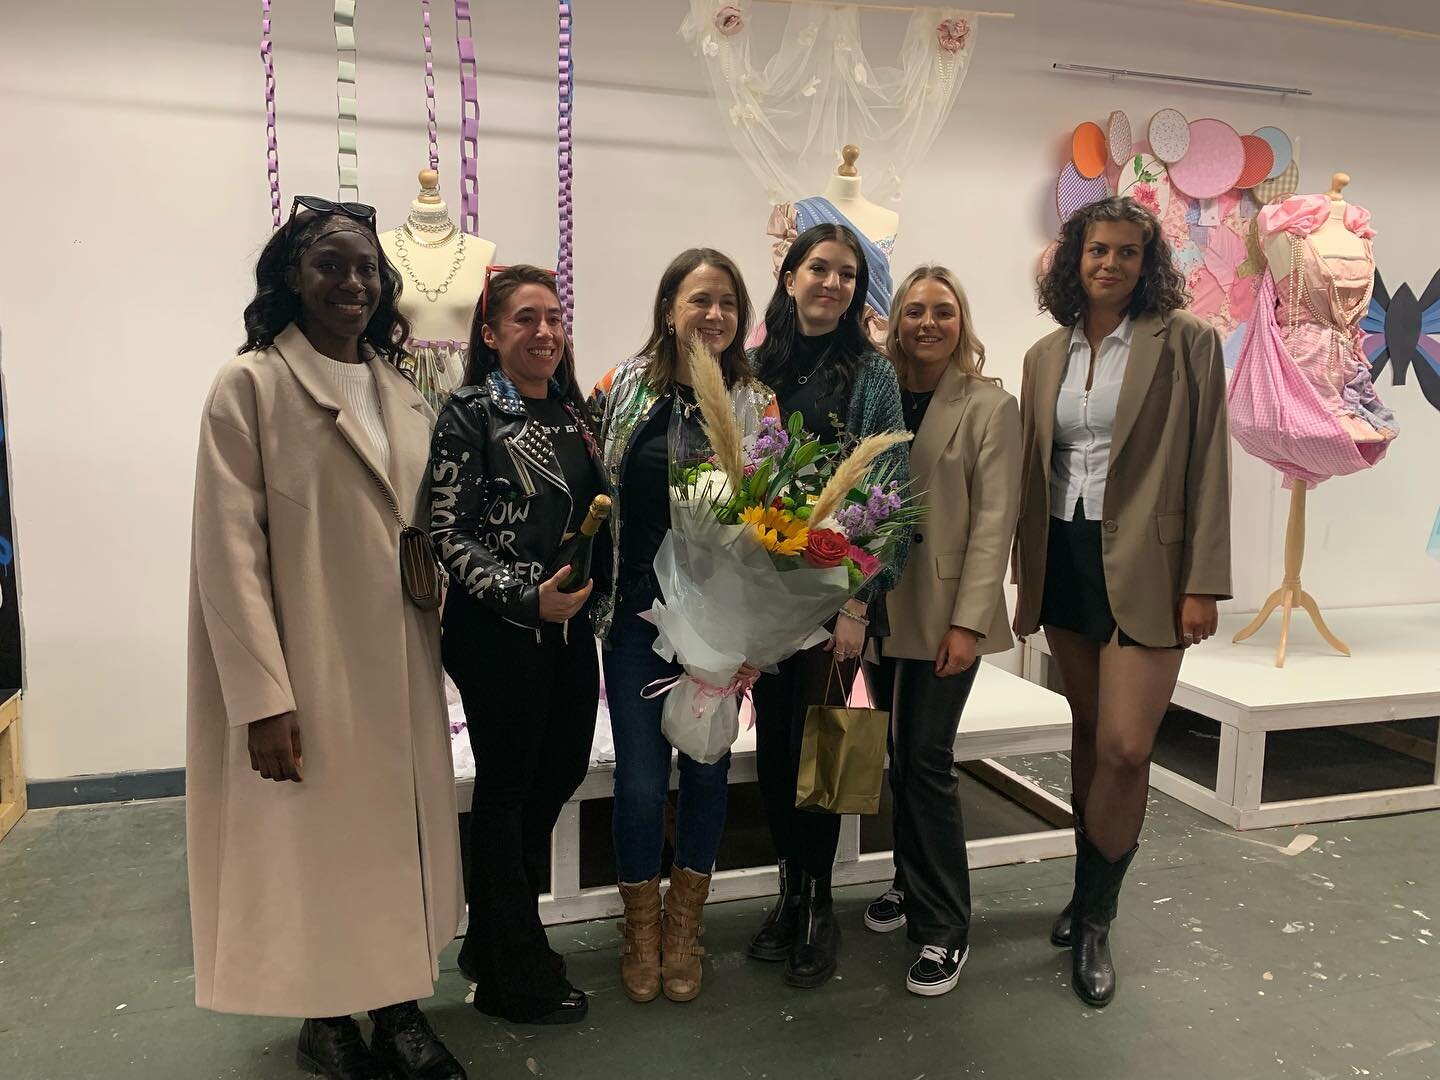 Fashion Styling &amp; Visual Merchandising Graduation Show

Show Open 9-4pm
Thursday 28th - Friday 29th

#vmlife #fashionstylingcourse #visualmerchandisingcourse #leavingcert2022 #furthereducation